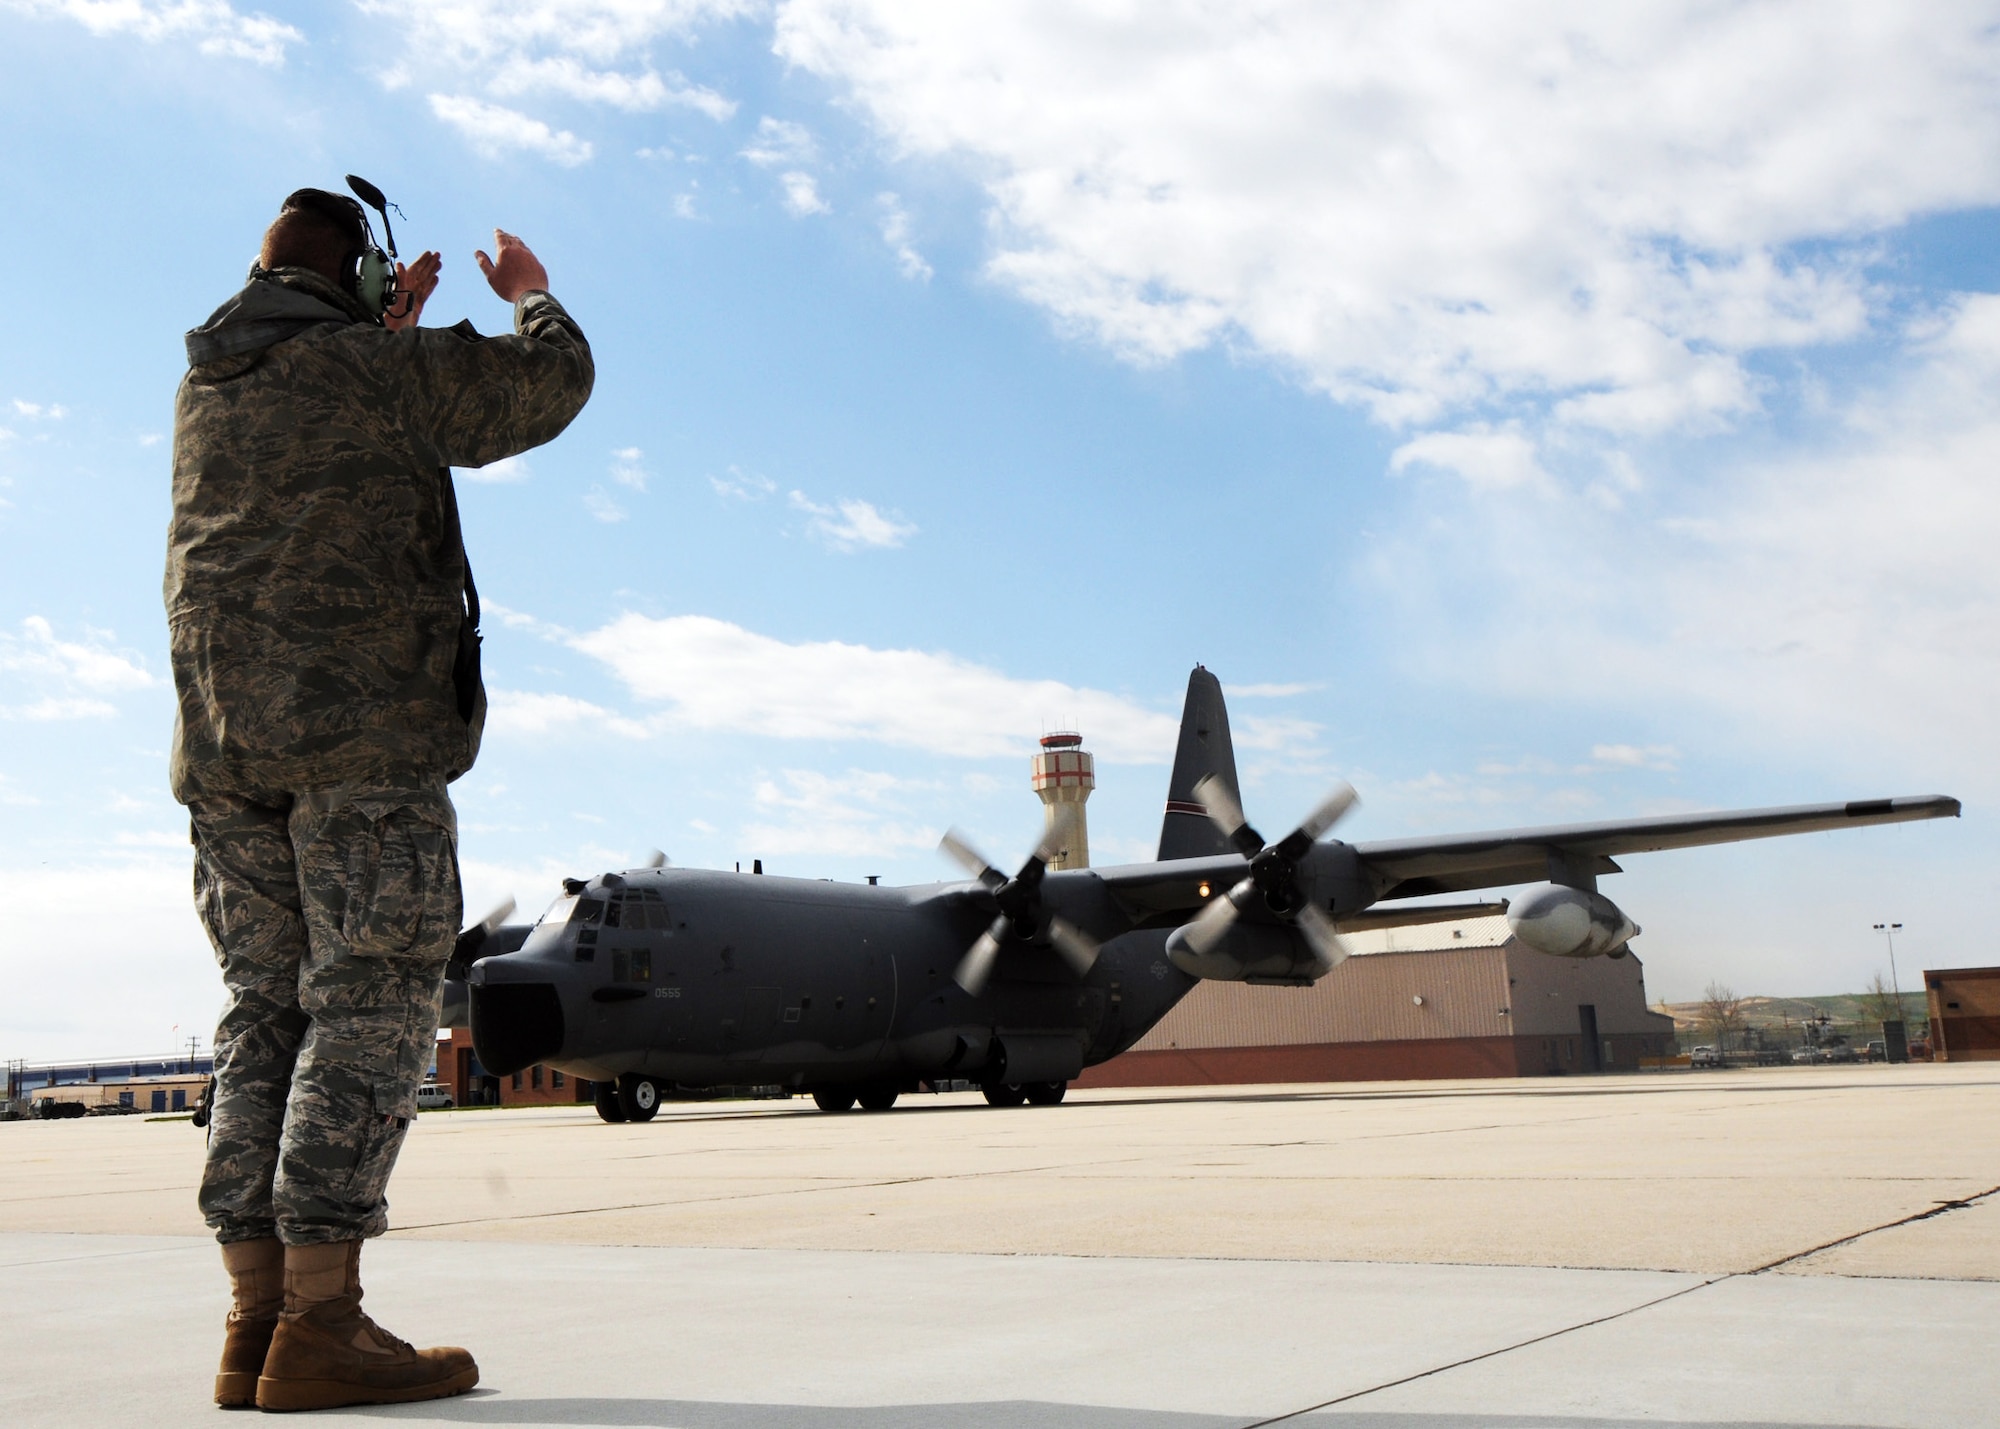 Staff Sgt. Travis Hooper, 179th Maintenance Group, marshals out MC-130E Combat Talon #555 prior to its final flight May 5 from Gowen Field, Idaho.  919th Special Operations Wing maintainers, along with the 179th were sent to Boise, Idaho, to prepare four Talons to take off for one more mission – a flight into retirement and decommissioning.  Three of the Talons flew to Davis-Monthan Air Force Base, Ariz.  The other went to Hurlburt Field, Fla., to be placed in the Air Force Special Operations Command airpark.  (U.S. Air Force photo/Tech. Sgt. Samuel King Jr.)  